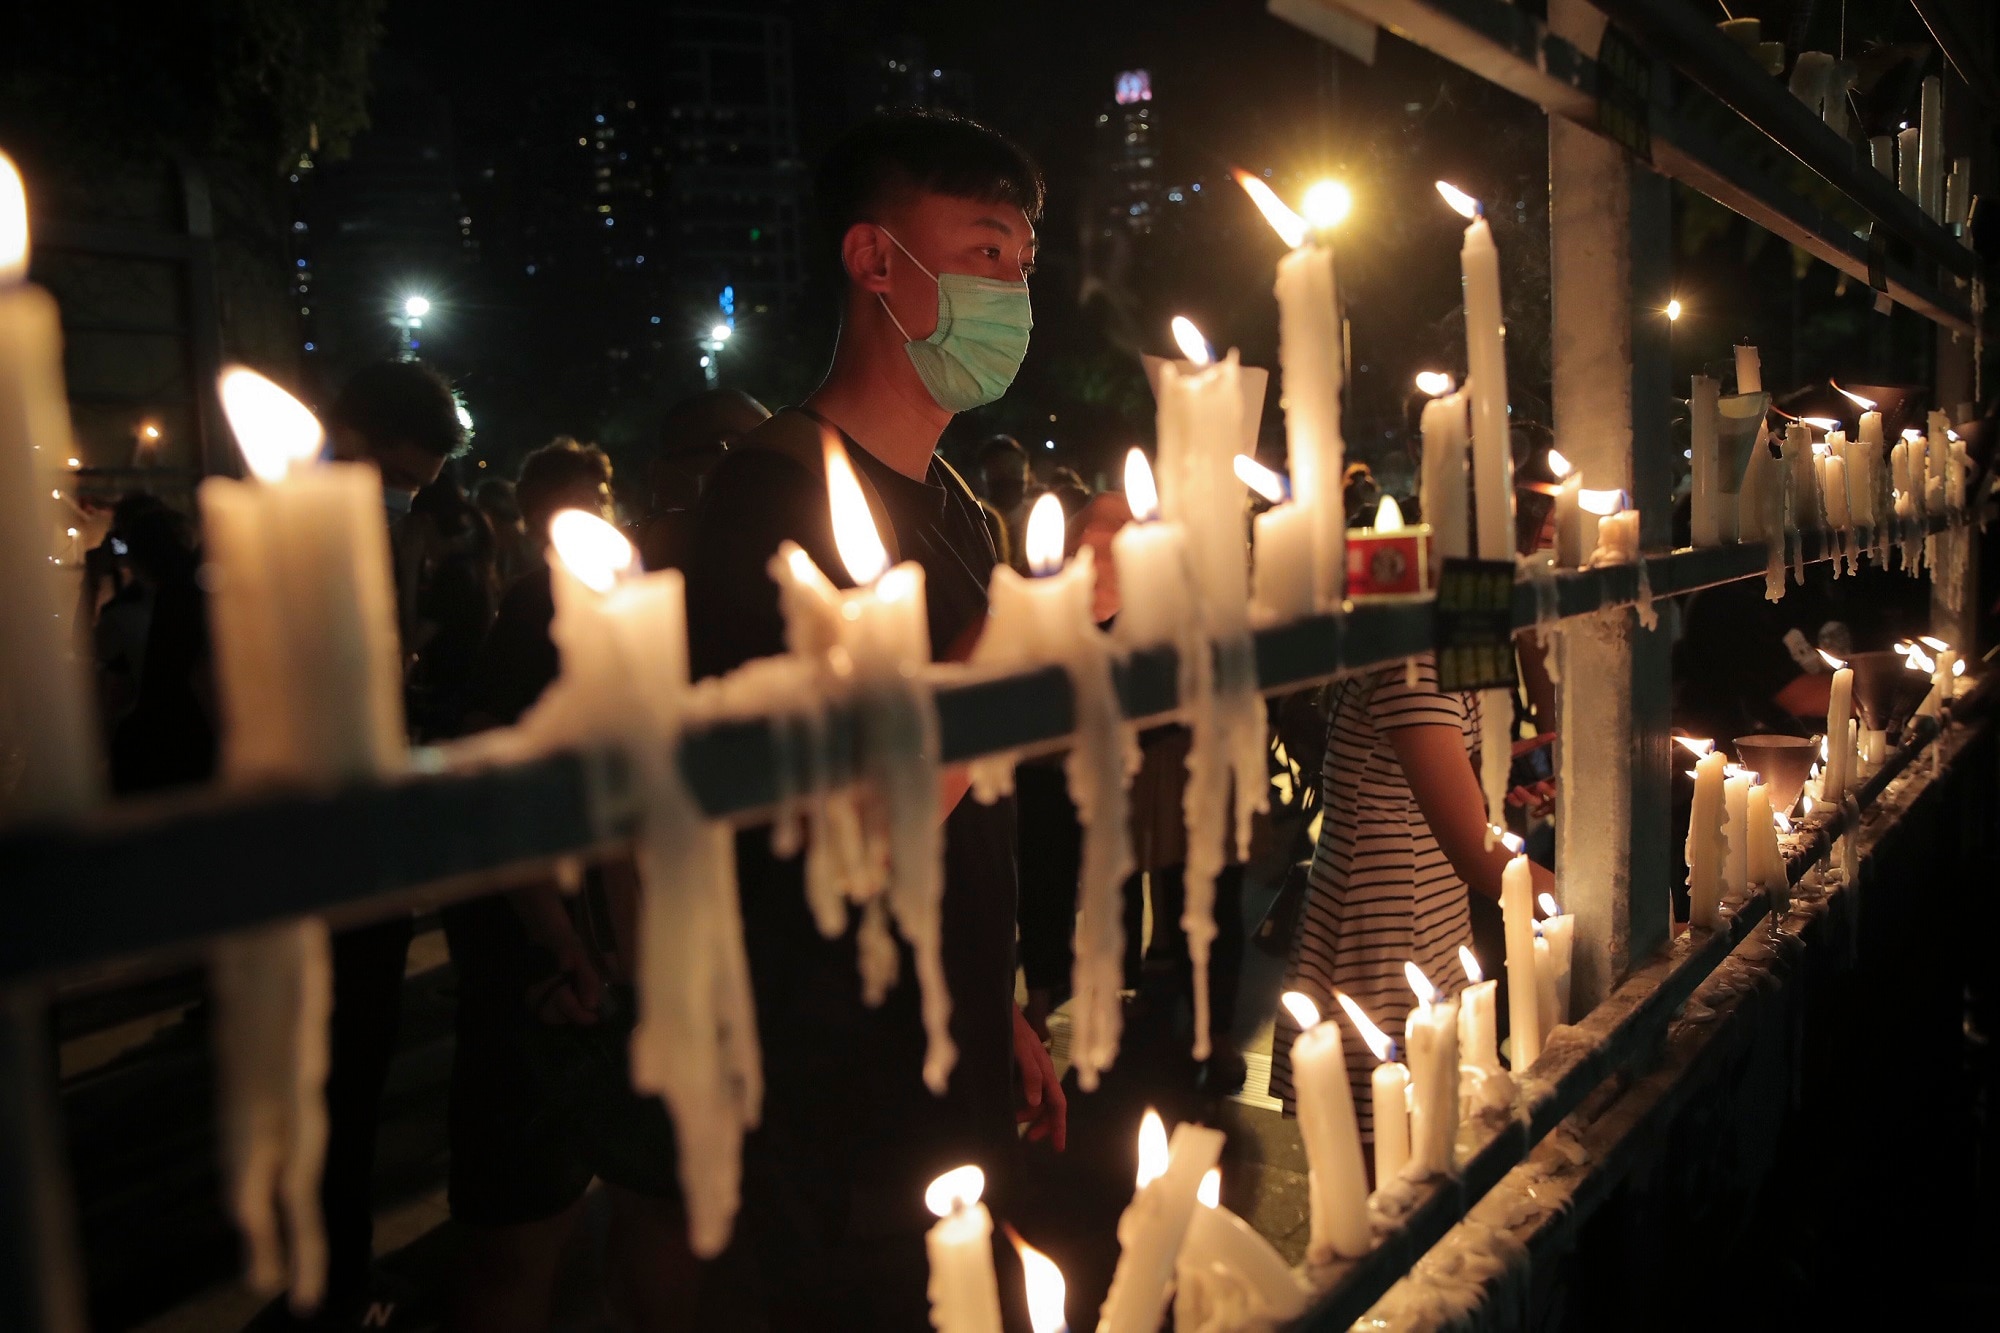 Participants light candles during a vigil for the victims of the 1989 Tiananmen Square Massacre at Victoria Park in Causeway Bay, Hong Kong on 4 June 2020.